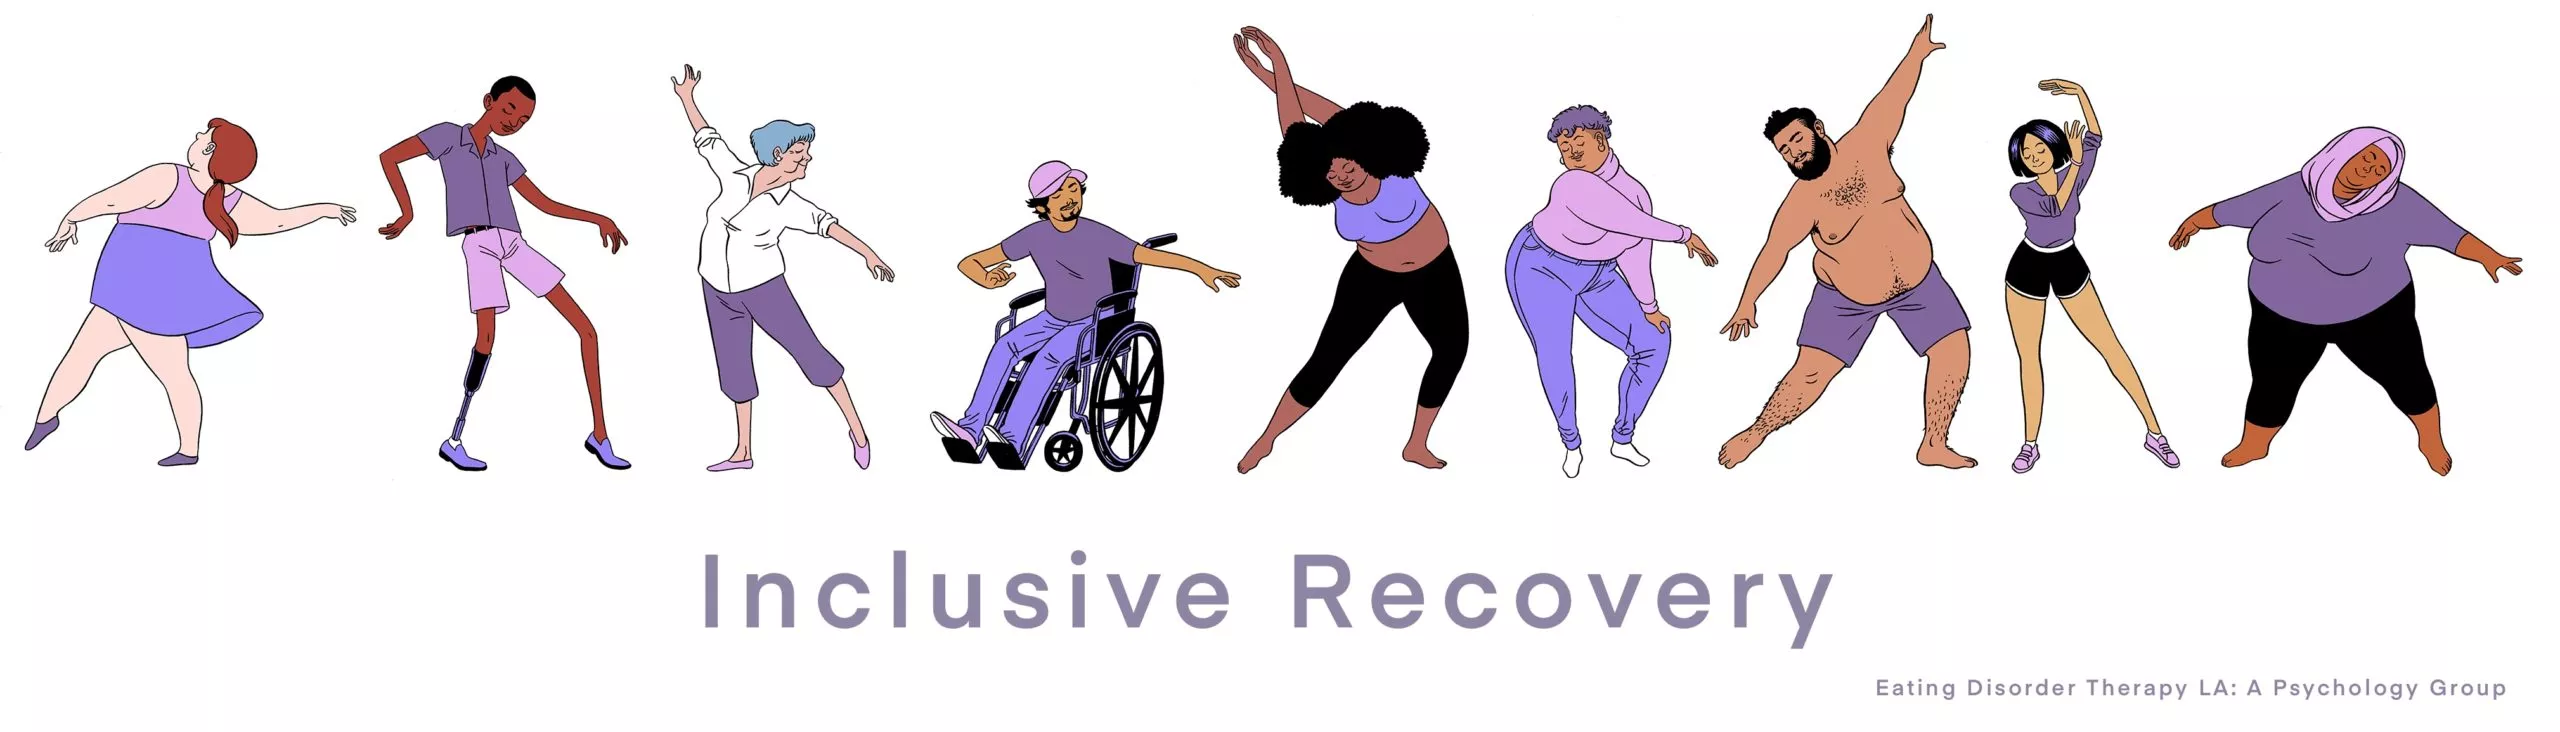 Illustrated image of multiple dancers of various body shapes, sizes and abilities with the text "Inclusive Recovery" underneath. Eating Disorder Treatment in Los Angeles, CA and online eating disorder treatment throughout the state of California including Modesto, Bakersfield, Napa, Palm Springs, and beyond!